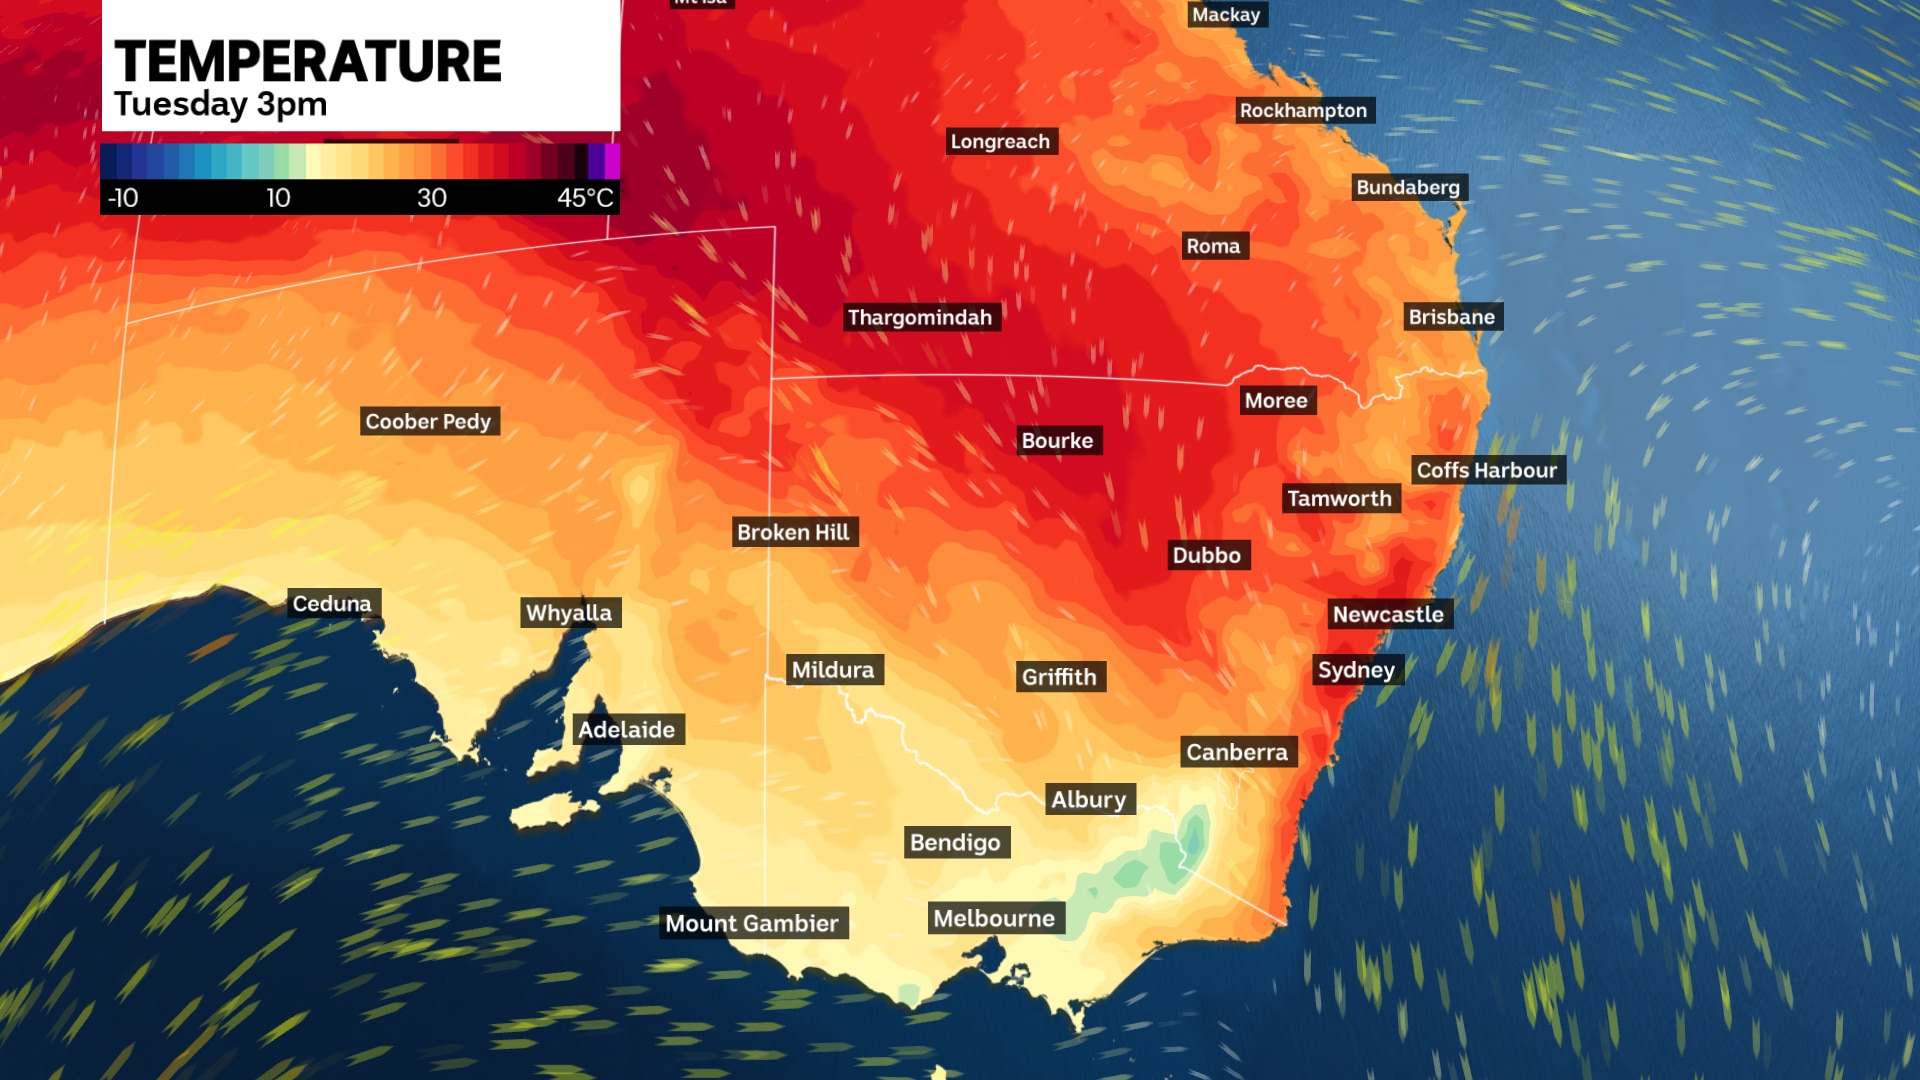 a map of eastern australia showing hot temperatures for those parts 